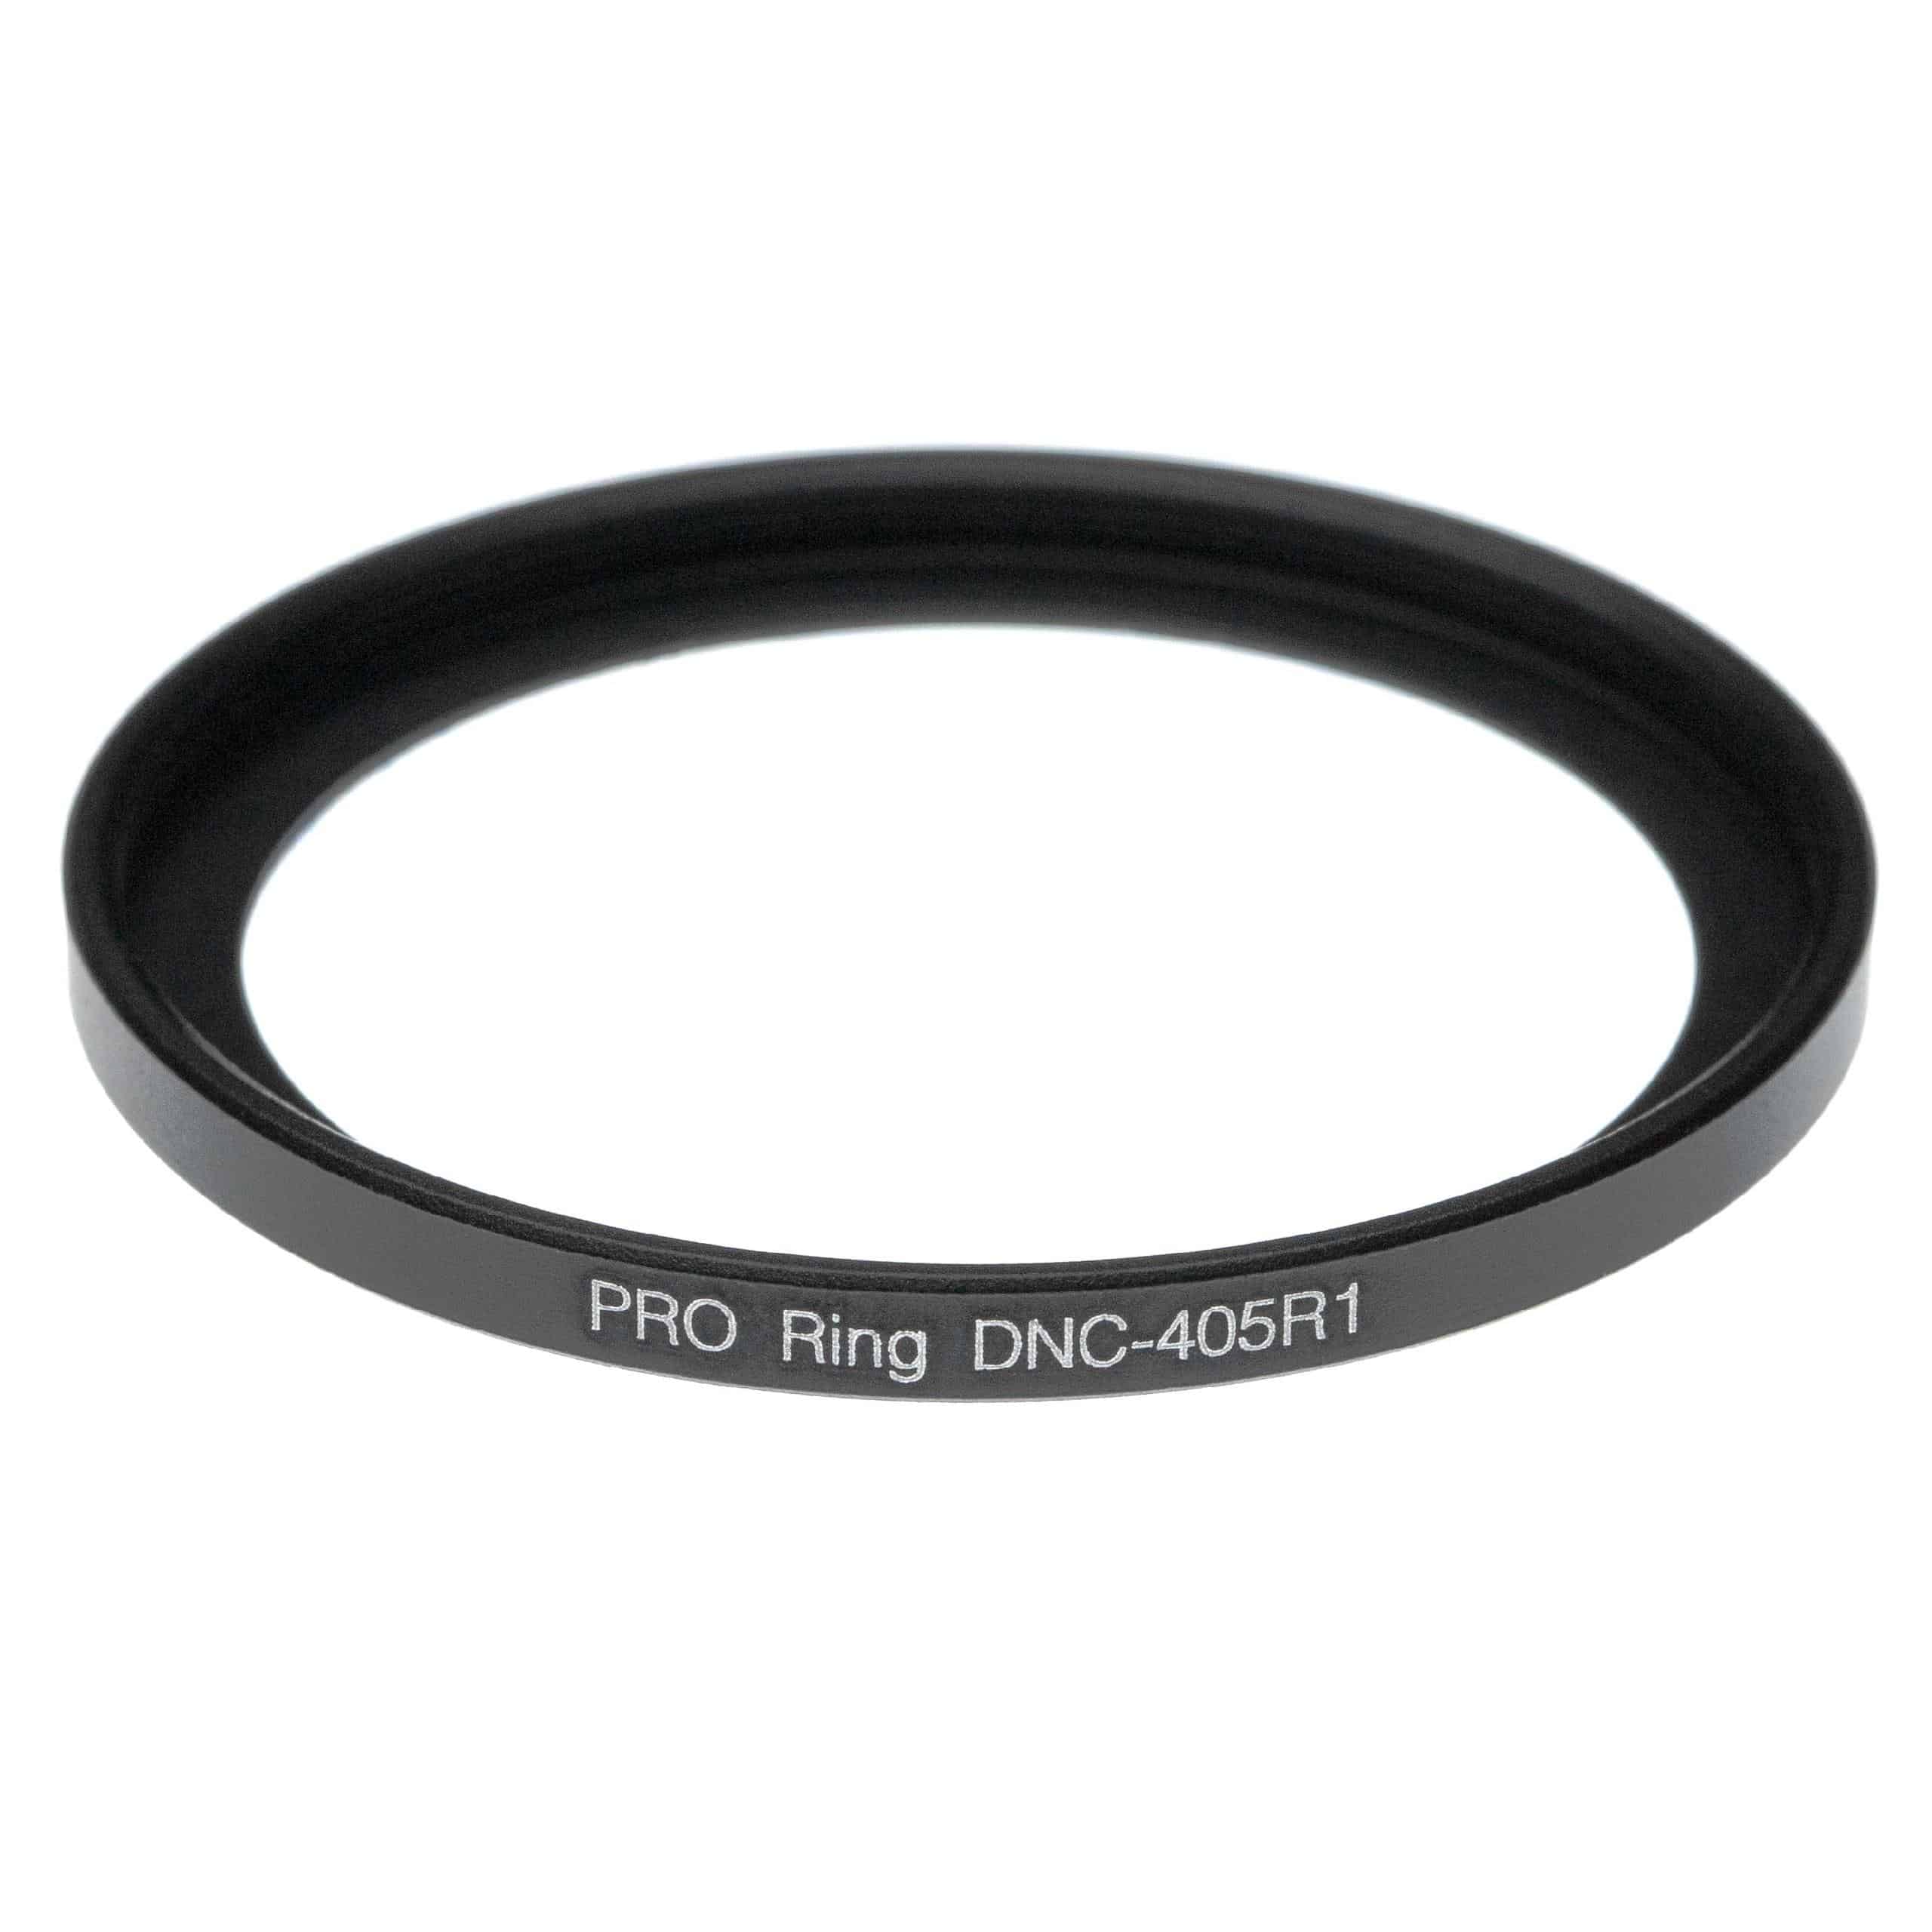 40.5 mm Filter Adapter suitable for P7100 Nikon, Sony, Canon Coolpix Camera Lens etc.